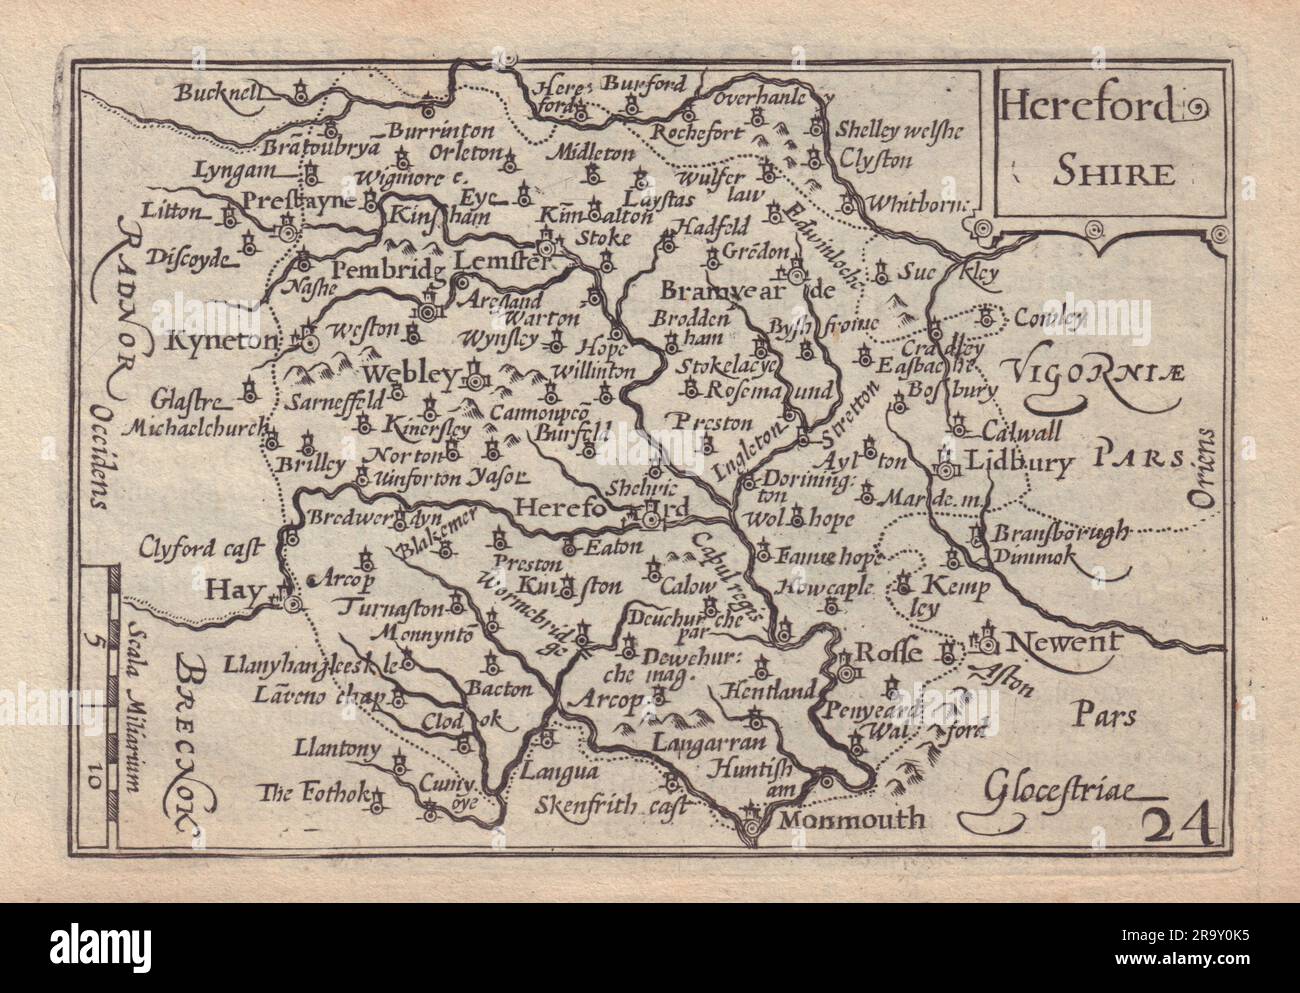 Hereford Shire by van den Keere. 'Speed miniature' Herefordshire county map 1632 Stock Photo